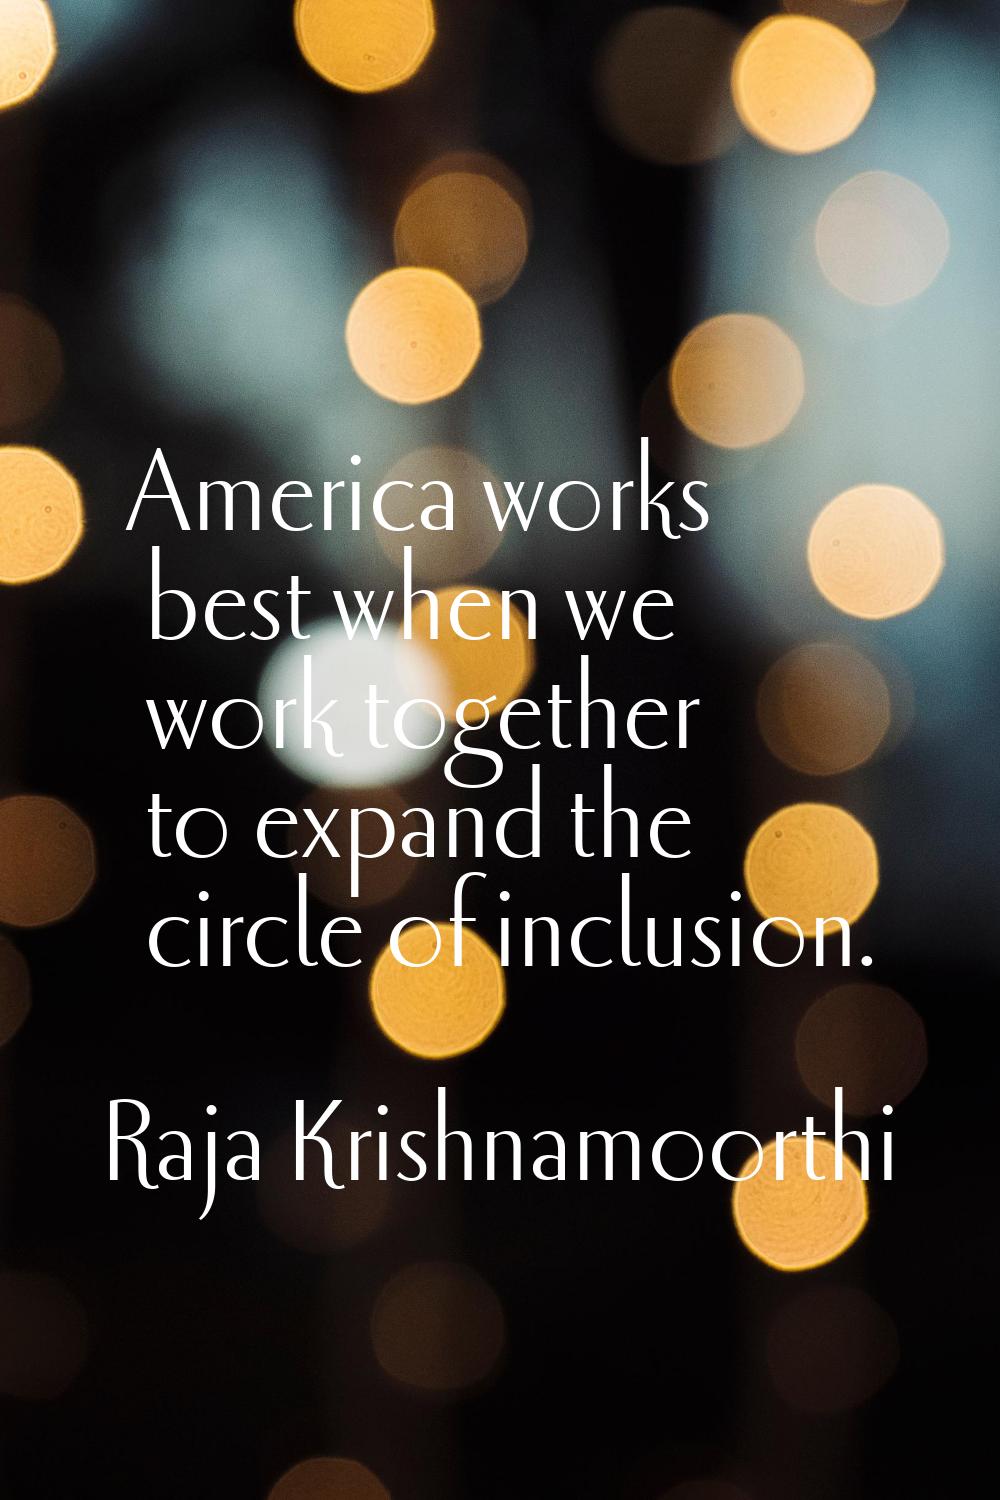 America works best when we work together to expand the circle of inclusion.